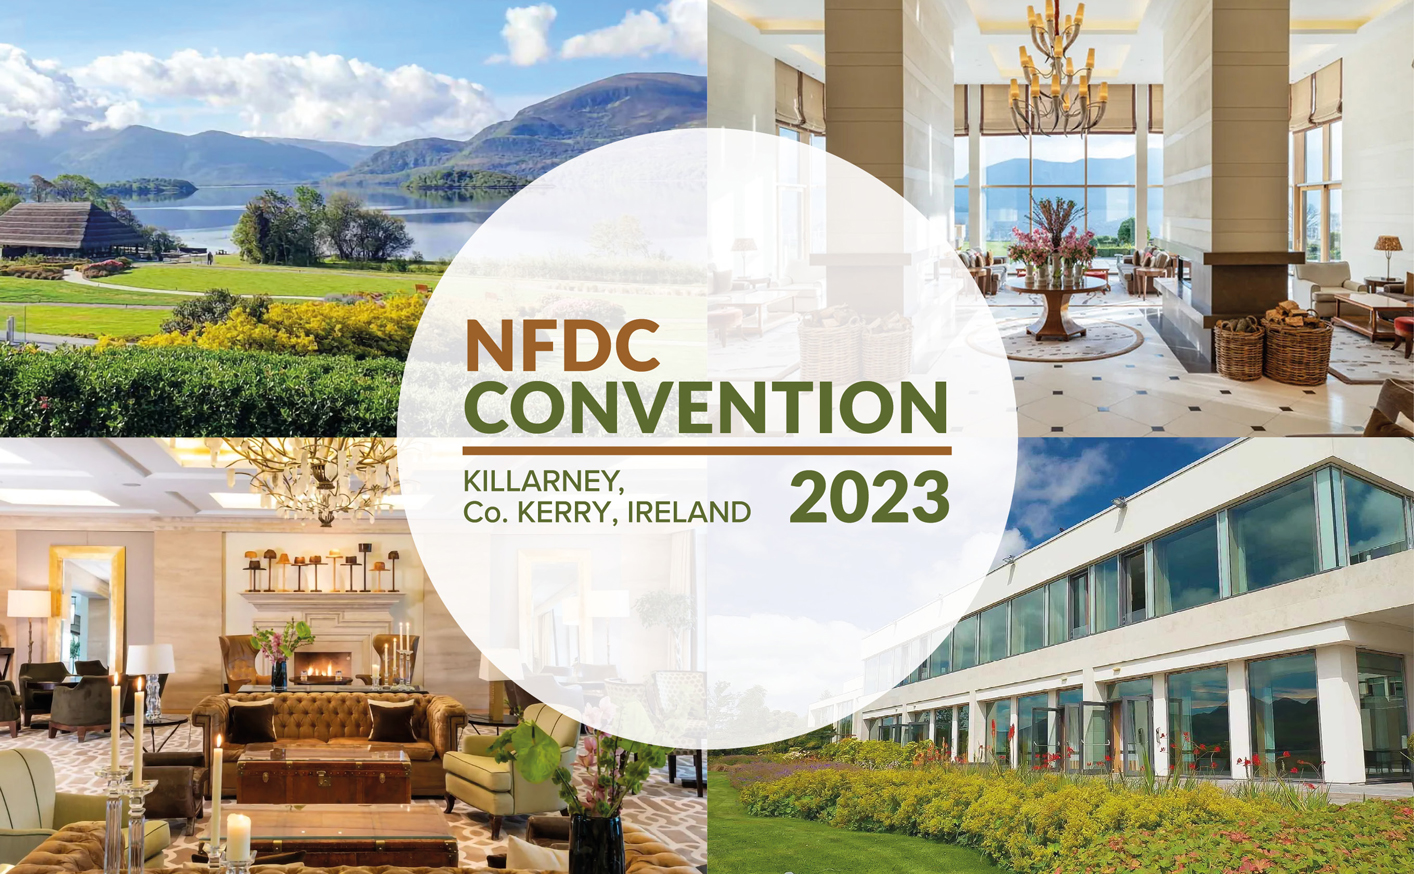 NFDC Convention 2023